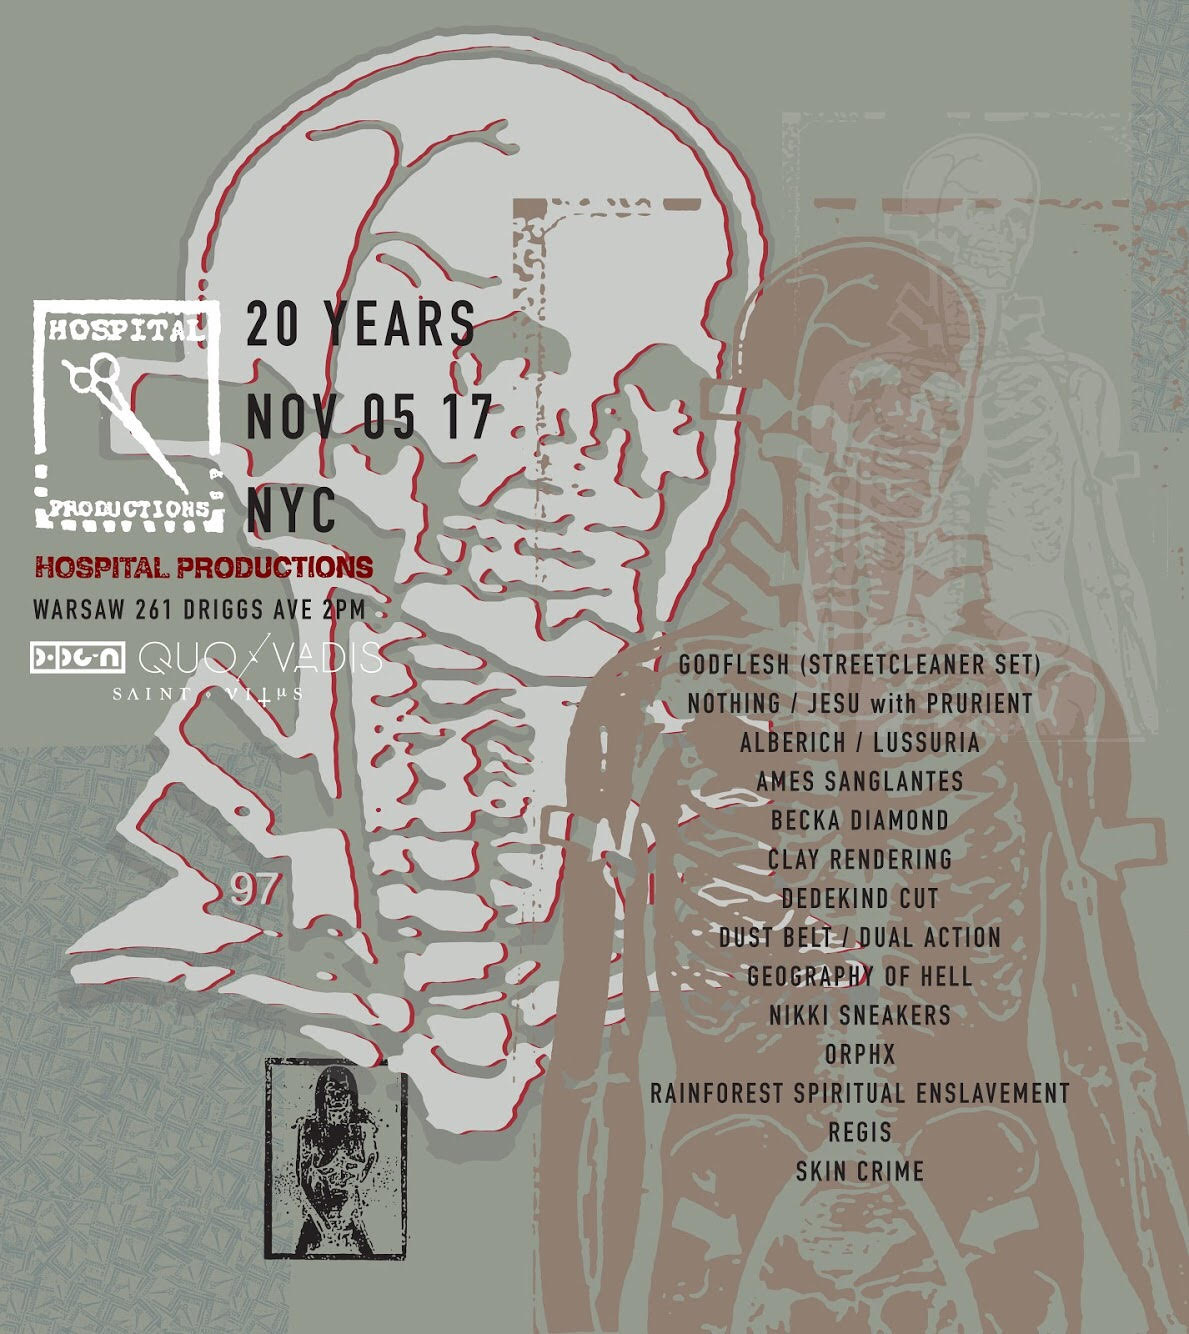 Hospital Records announce 20th anniversary show featuring Godflesh, Prurient, Regis, more